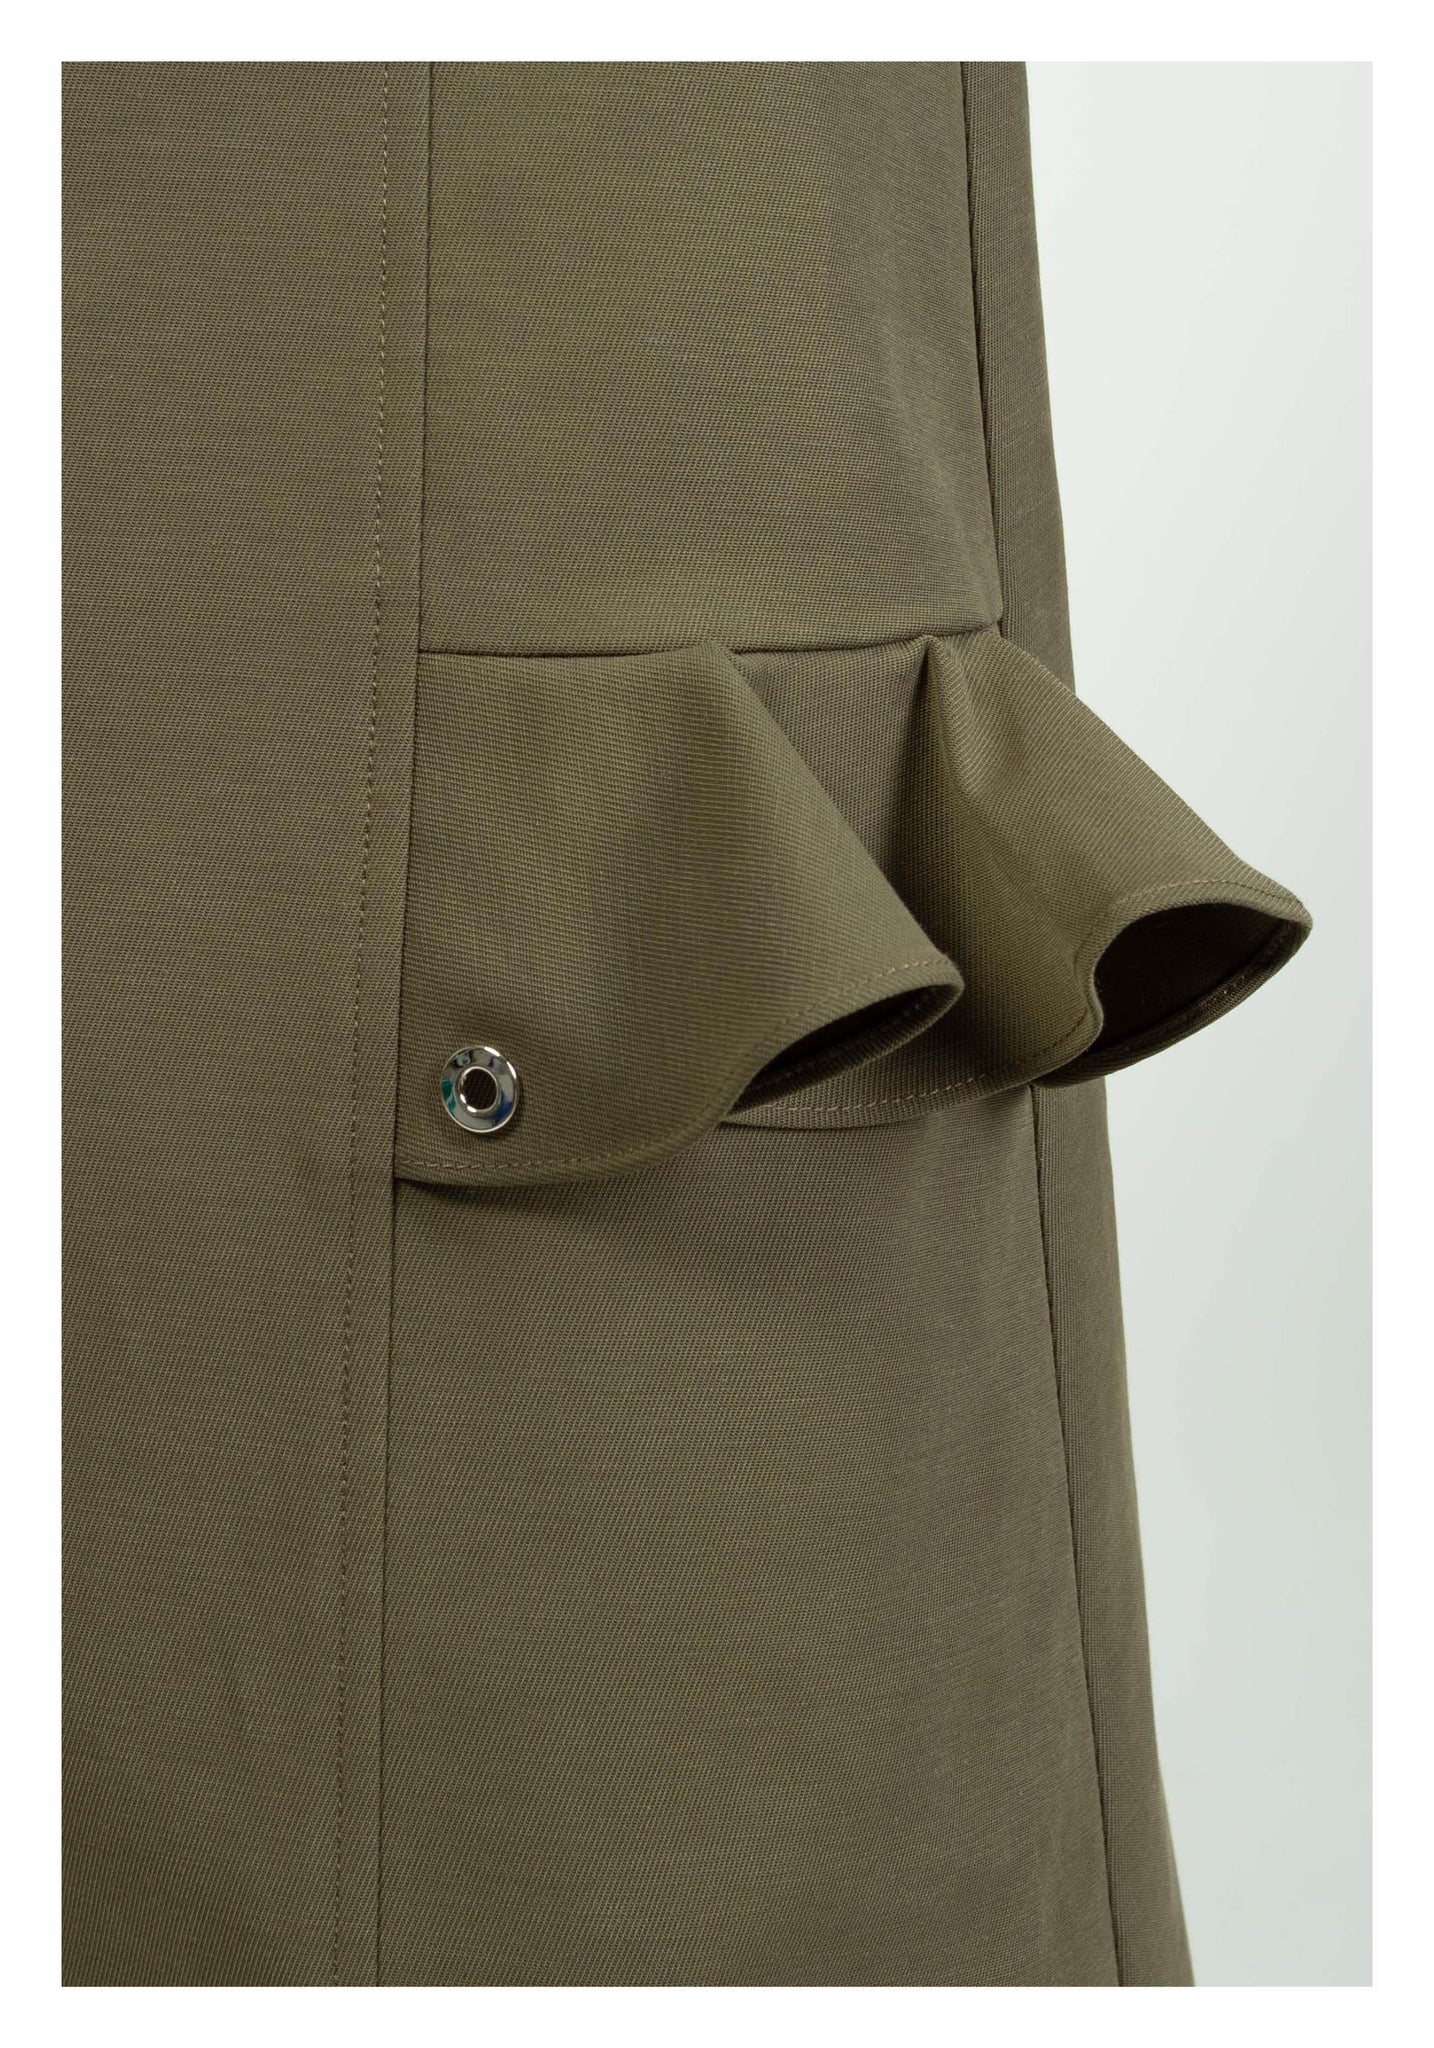 Ruffle Trims Just Fit A-Line Skirt Military Green